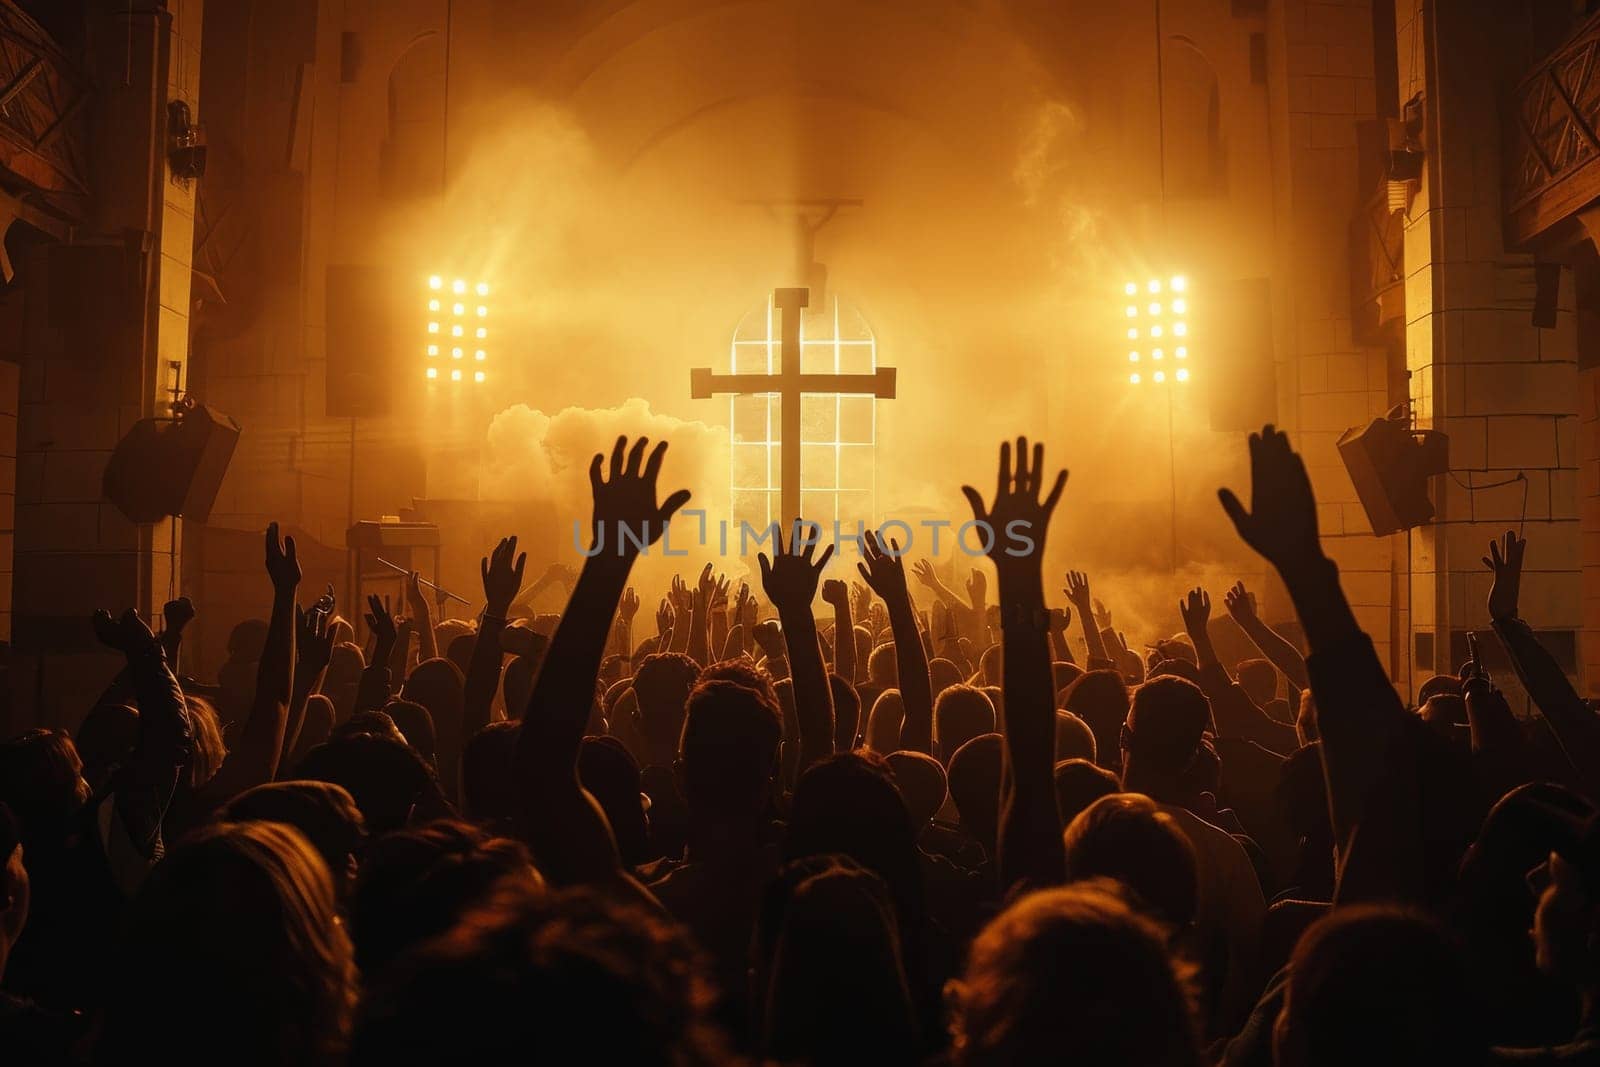 A large crowd of christian people are gathered in a church, with their hands raised in the air and a large cross in the center of the room. The atmosphere is one of worship and unity